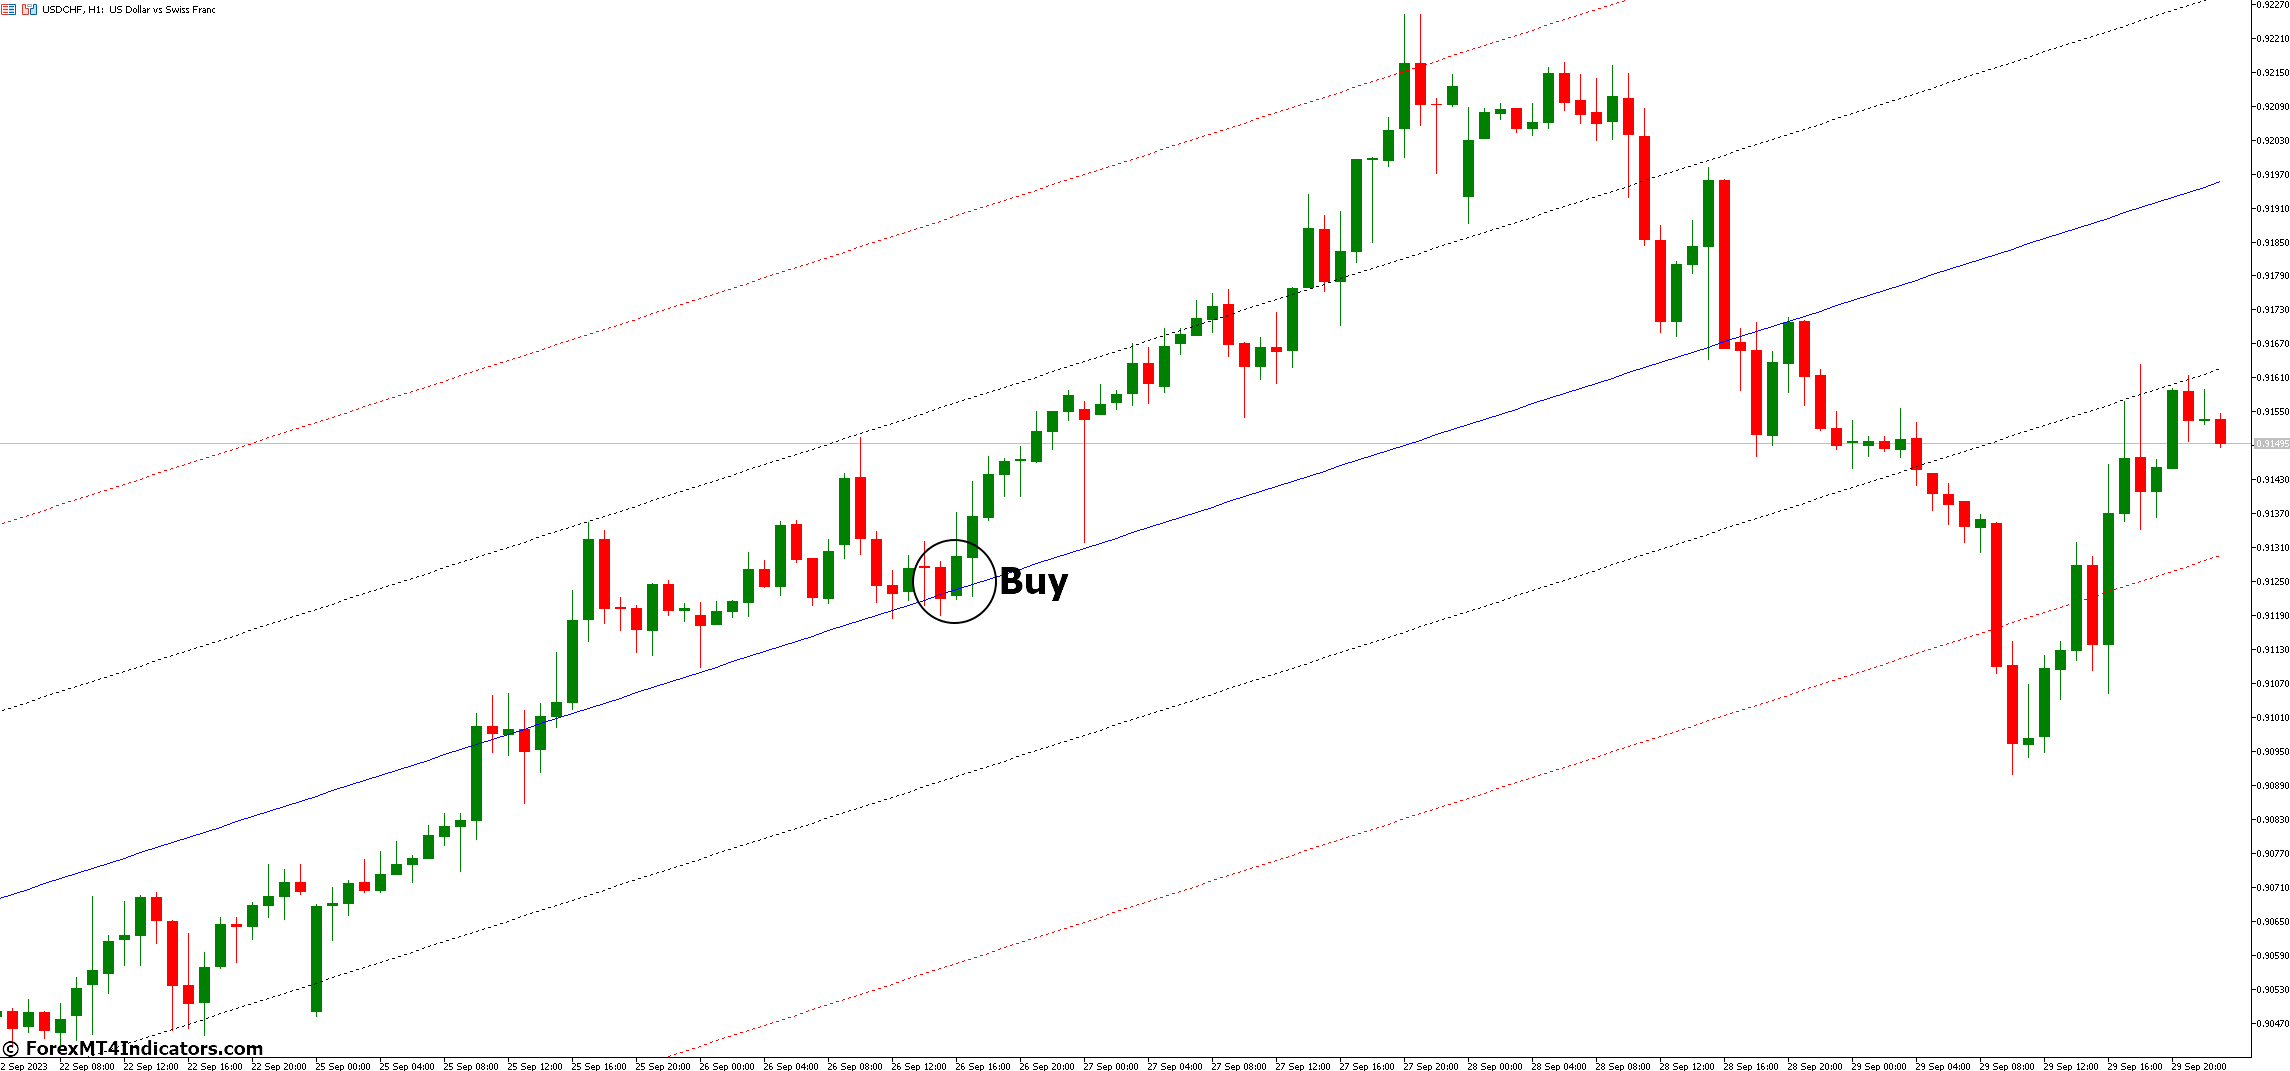 How to Trade with Linear Regression Channel MT5 Indicator - Buy Entry